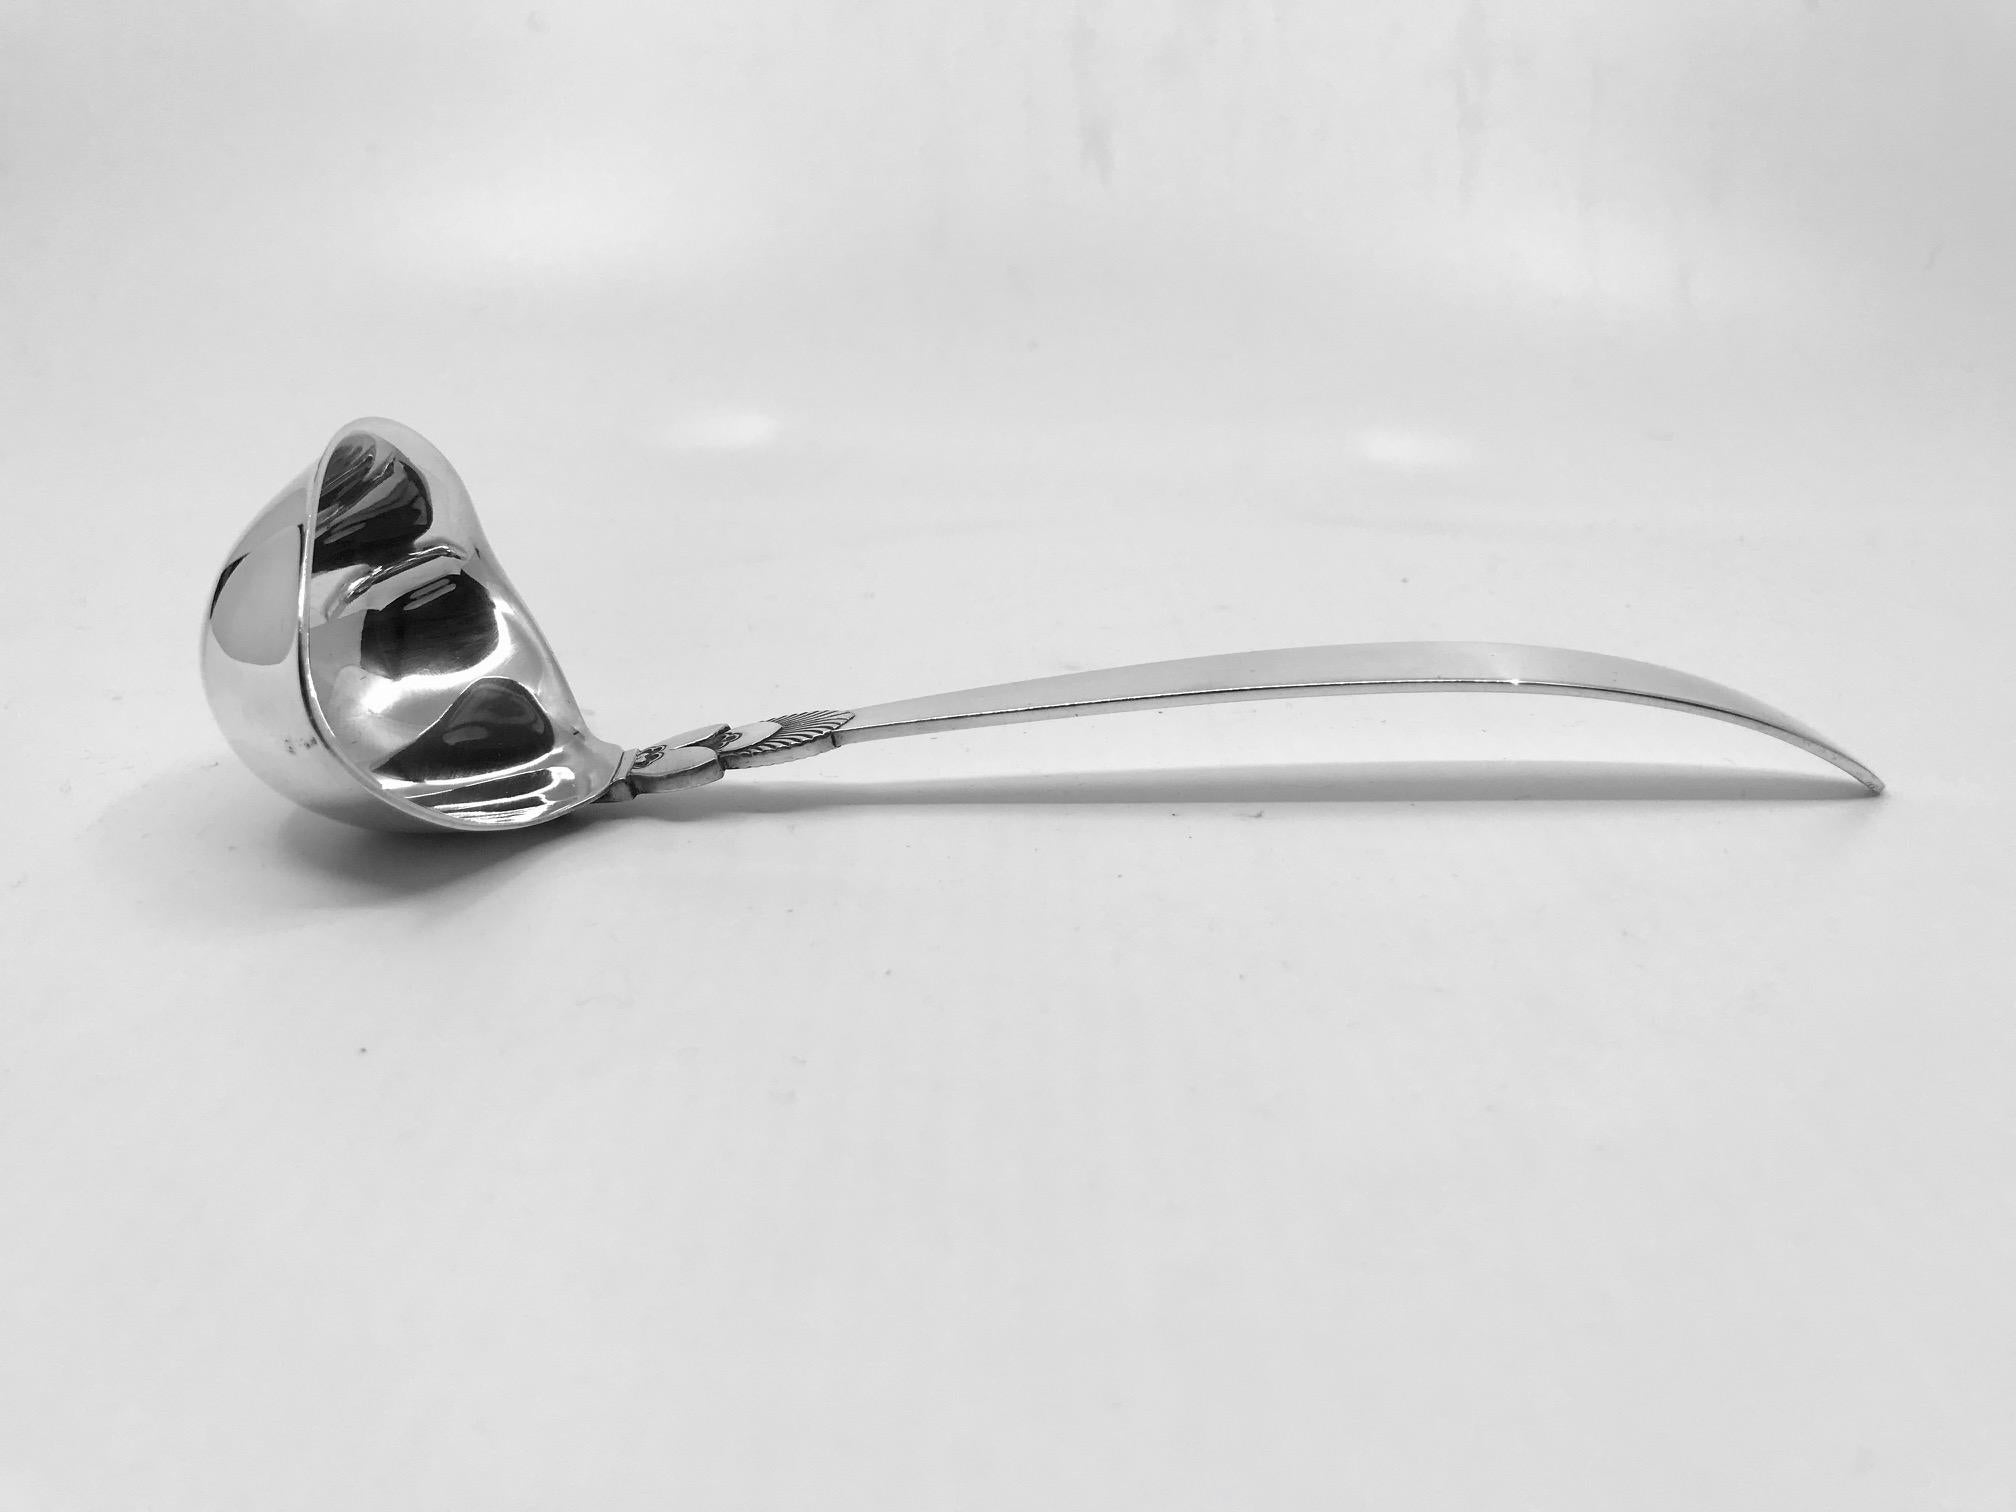 Sterling silver Georg Jensen gravy ladle with curved handle, item 153 in the Cactus pattern, design #30 by Gundorph Albertus from 1930.

Additional information:
Material: Sterling silve
Style: Art Deco
Hallmarks: With Georg Jensen hallmark, made in